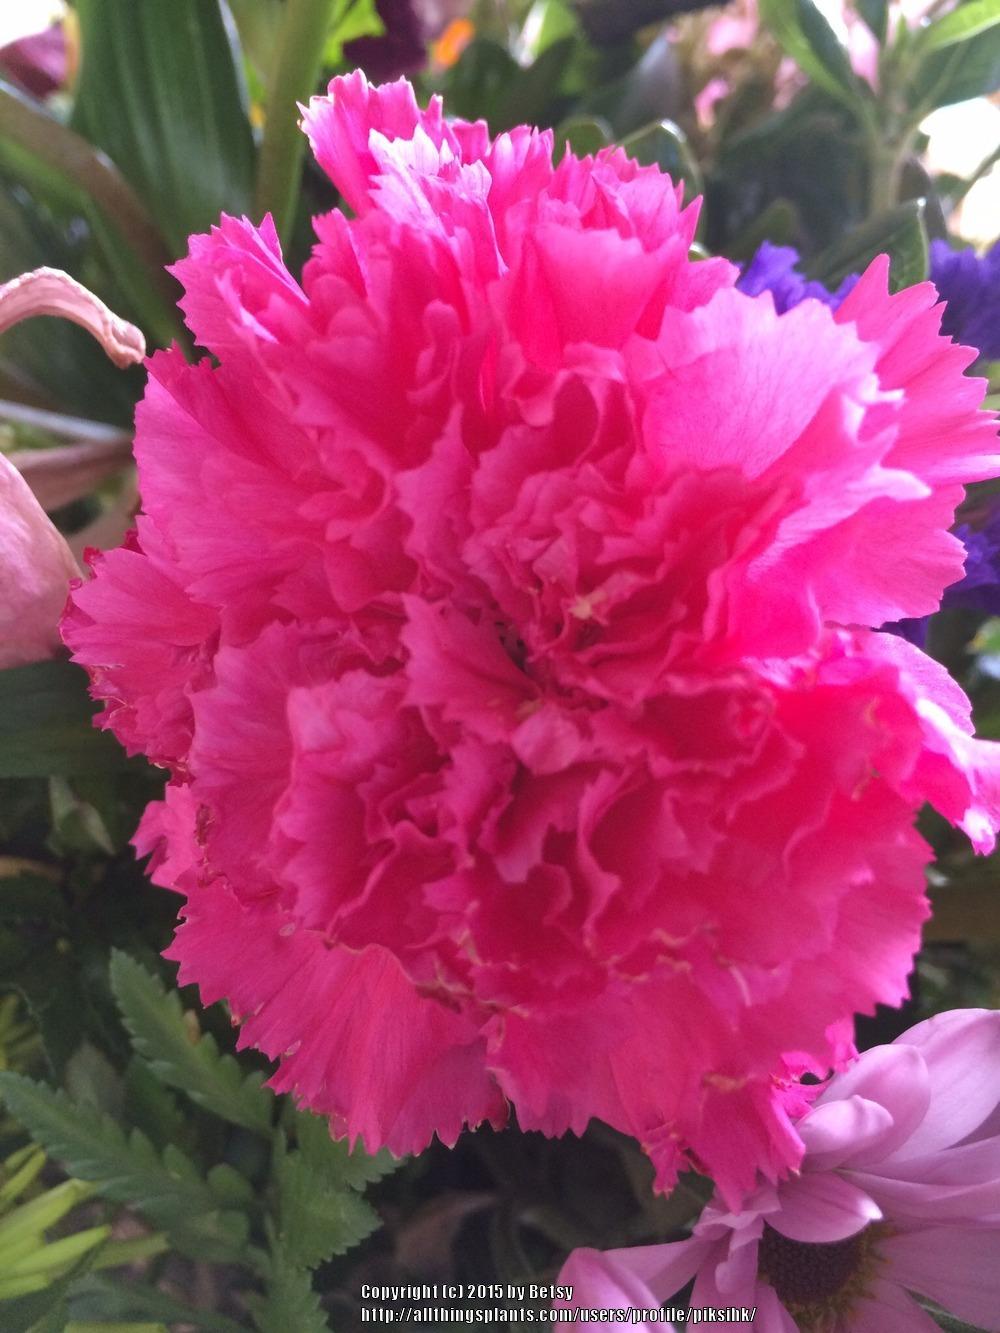 Photo of Dianthus uploaded by piksihk